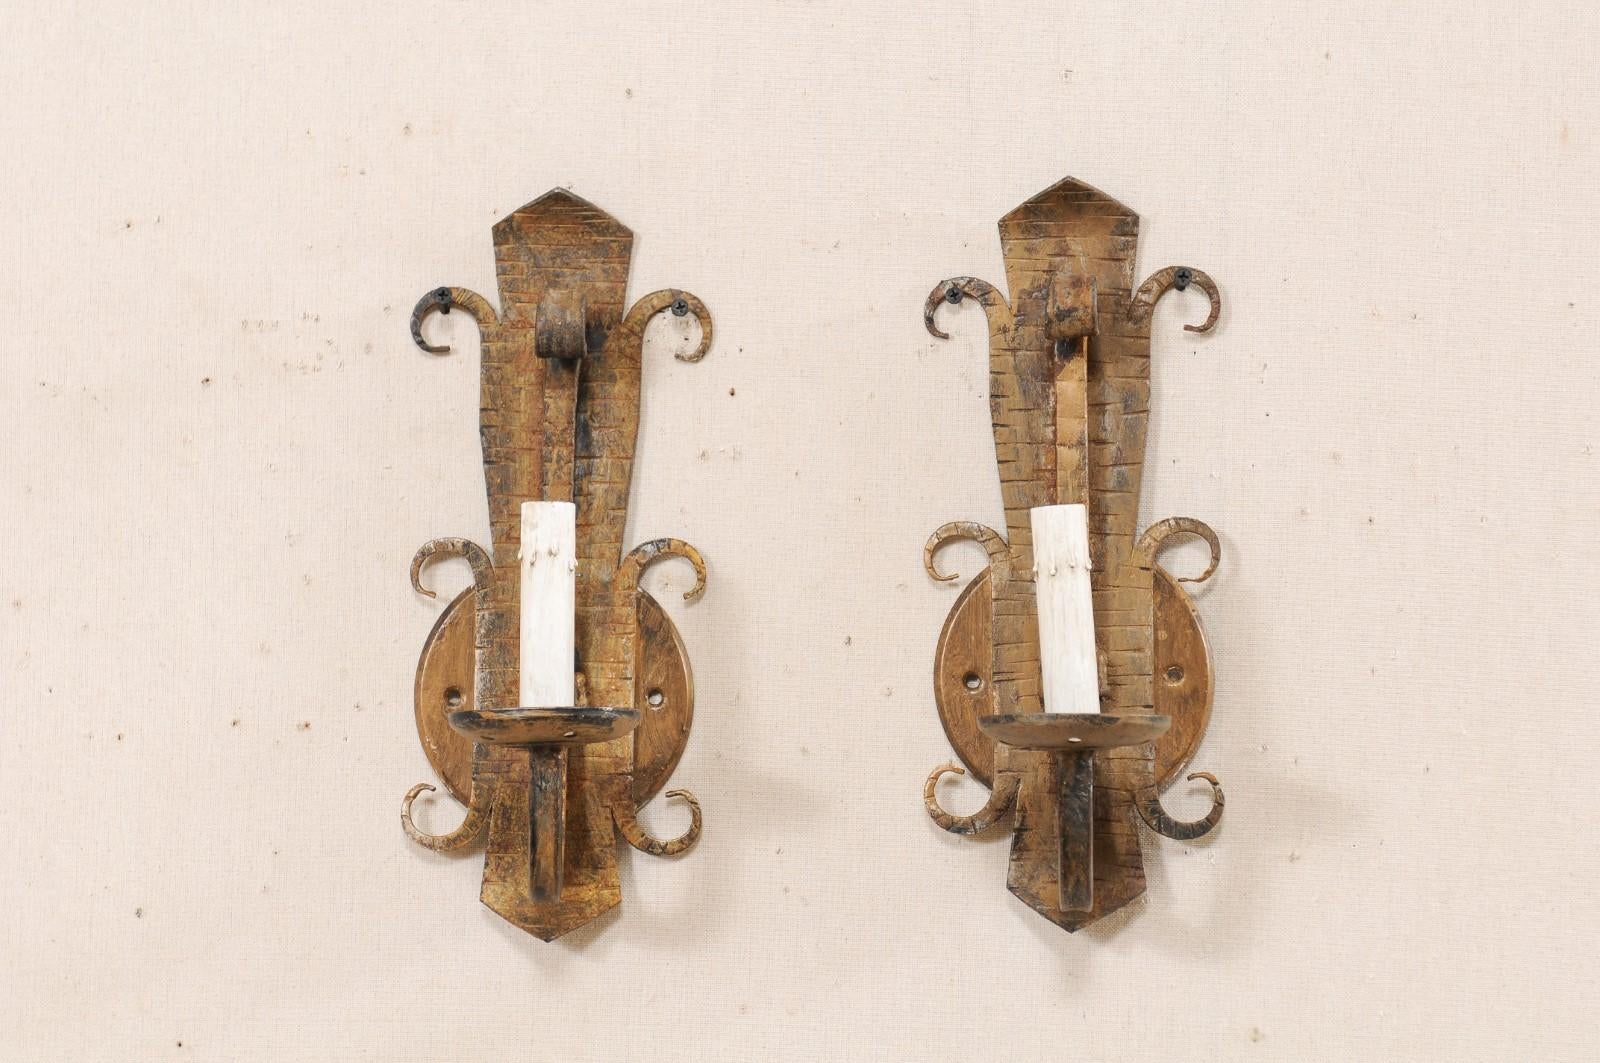 A pair of Spanish gold-tone iron sconces from the mid-20th century. This vintage pair of sconces from Spain each feature a stylized fleur-de-lis body with a single arm extending out into a downward swag, supporting a ruffled iron bobèche and painted